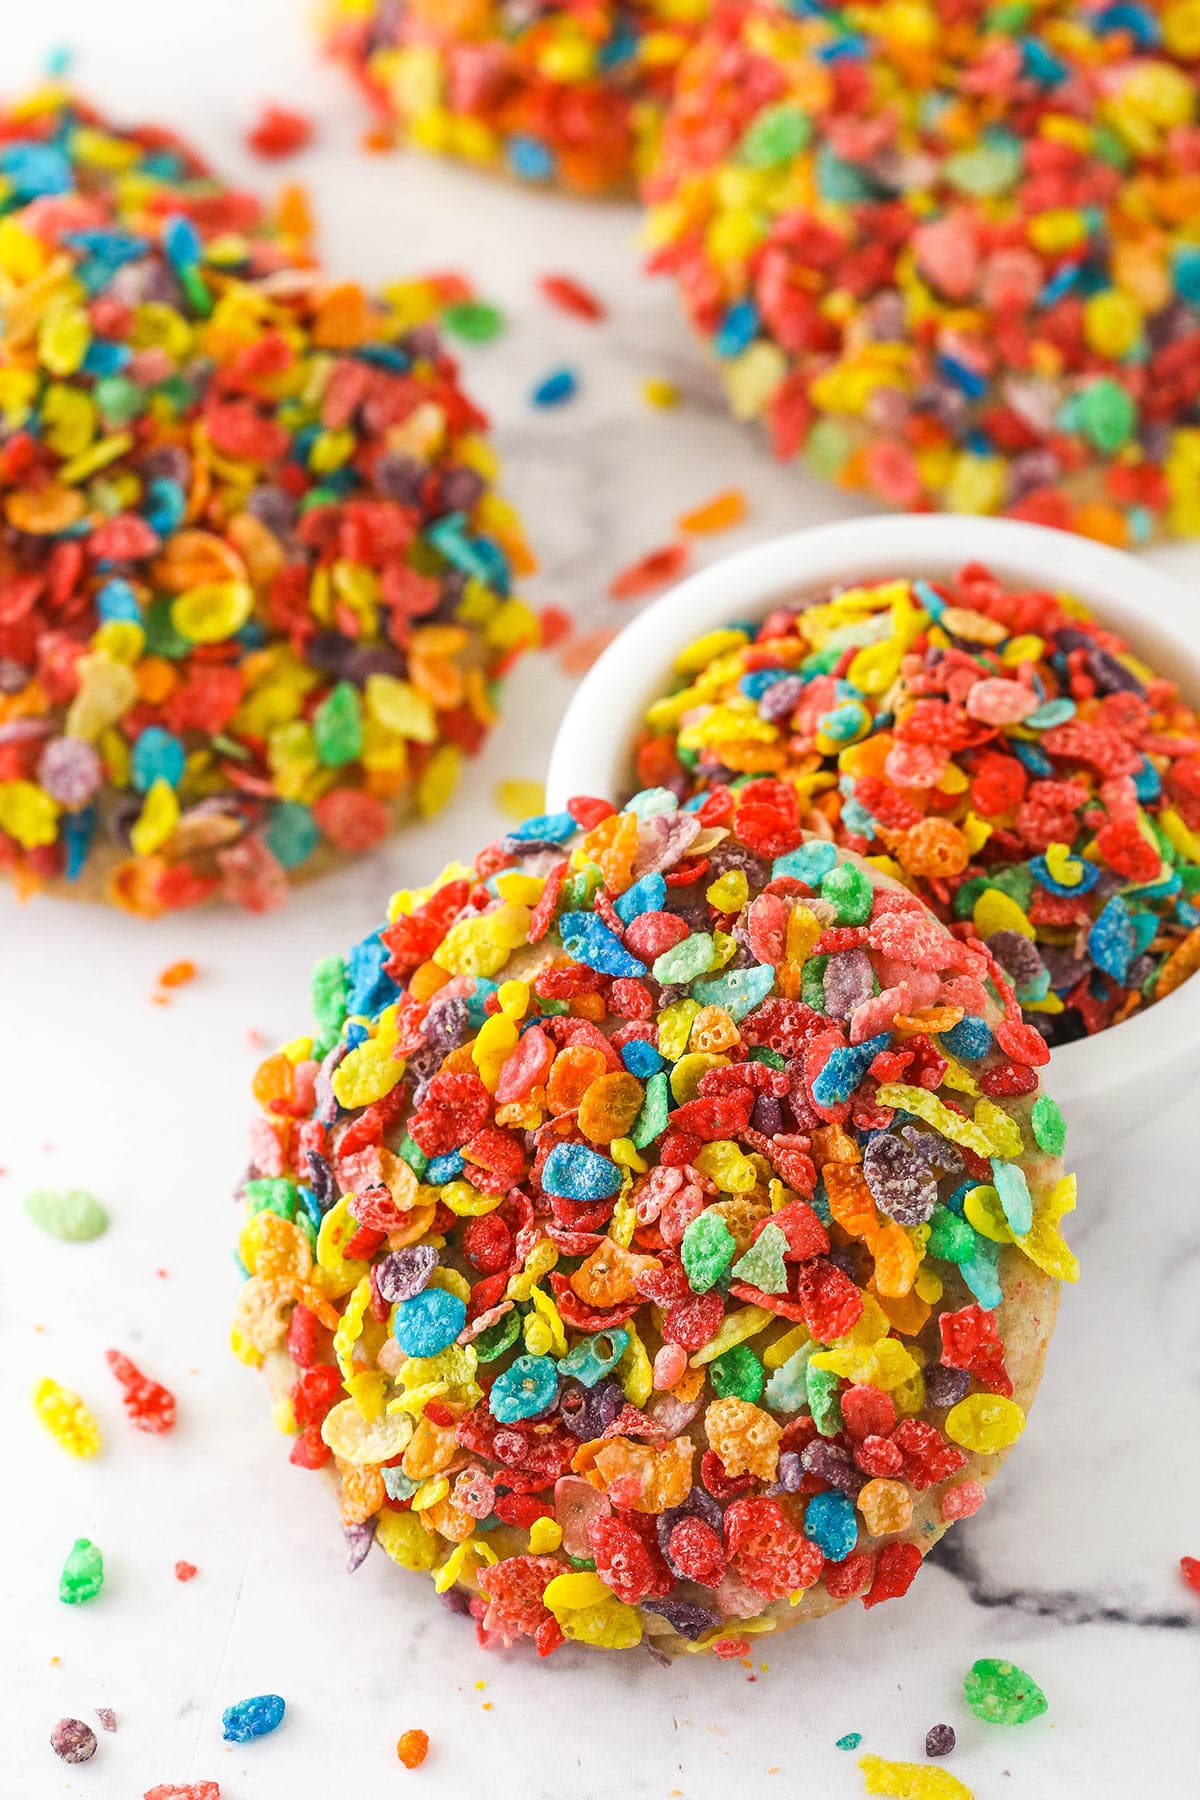 A bowl of Fruit Pebbles with Fruity Pebbles cookie leaning against it surrounded by more Fruity Pebbles cookies.